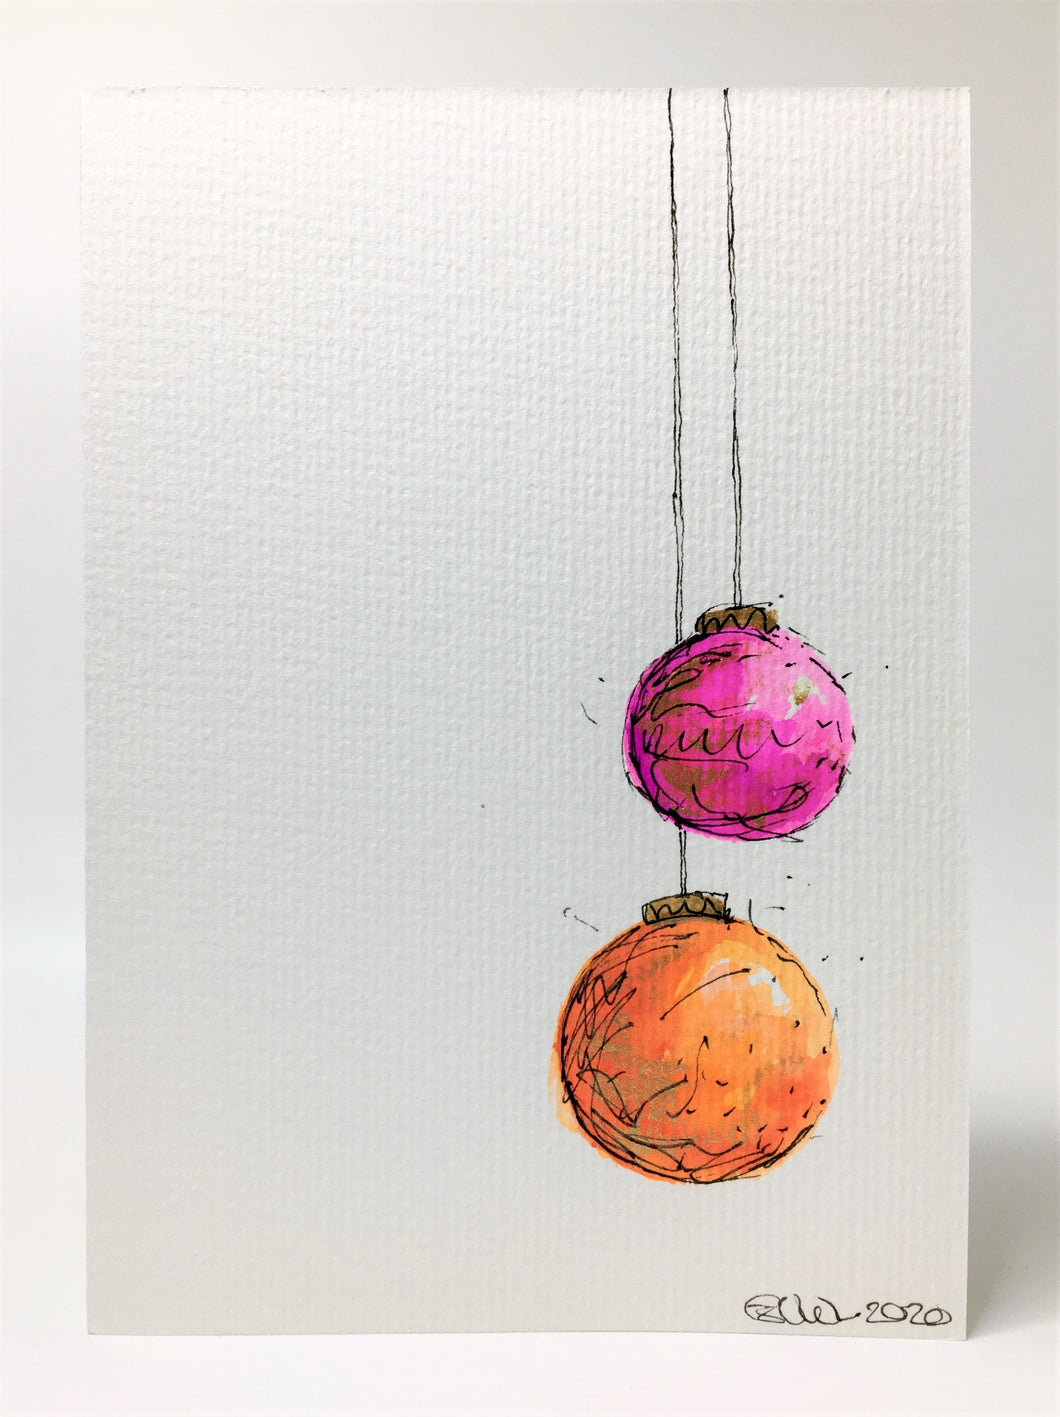 Original Hand Painted Christmas Card - Bauble Collection - Pink, Orange and Gold Baubles - eDgE dEsiGn London